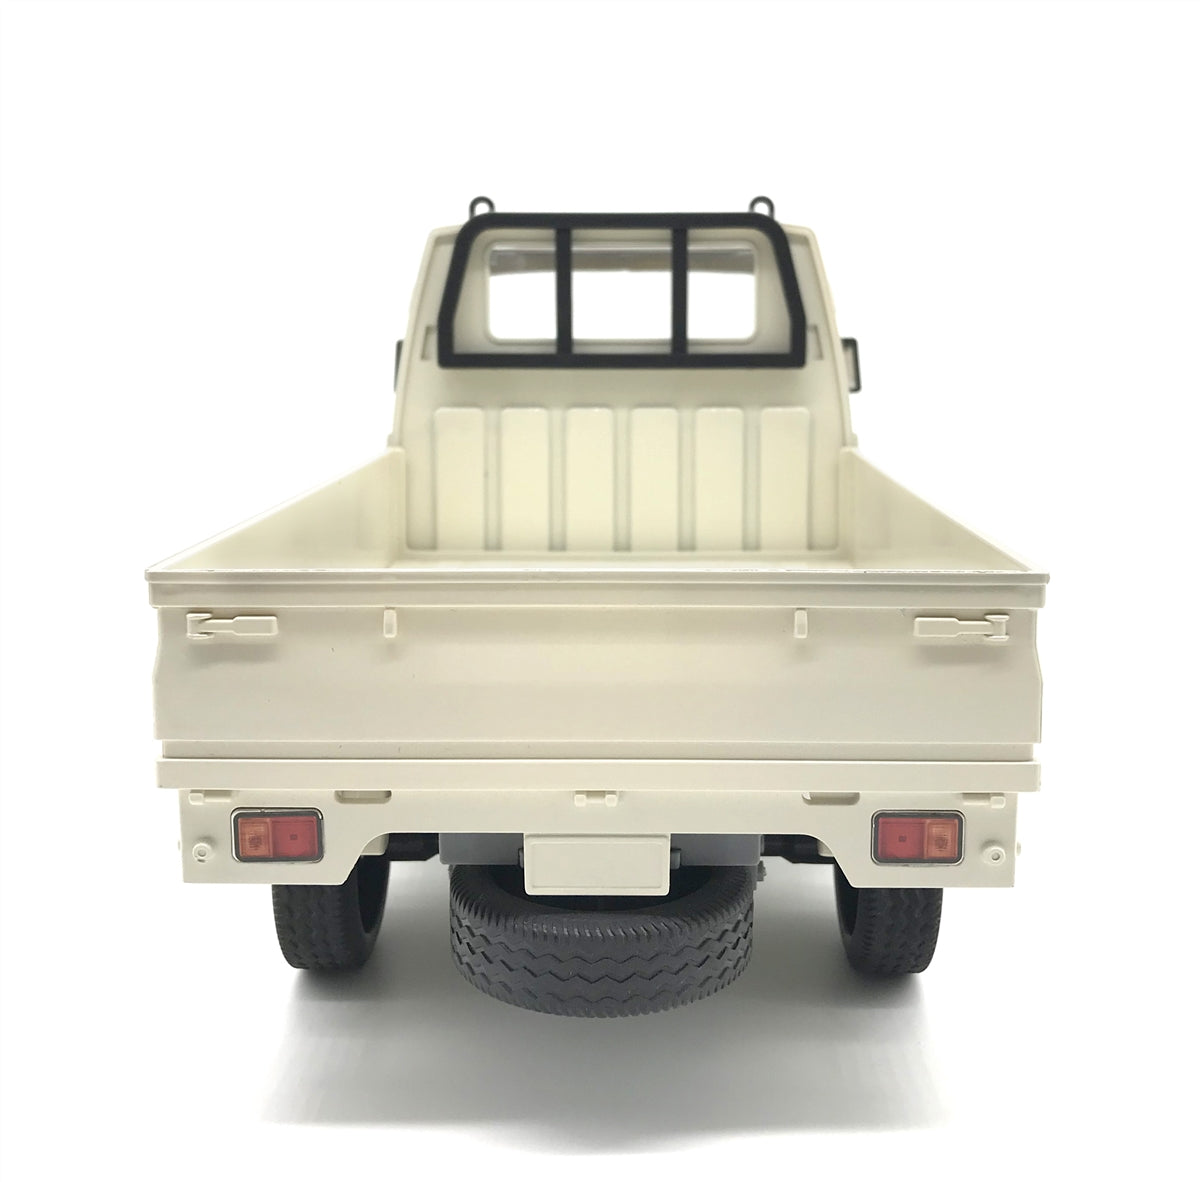 D12 Kei Truck - RTR - Silver/White - WPL RC Official Store